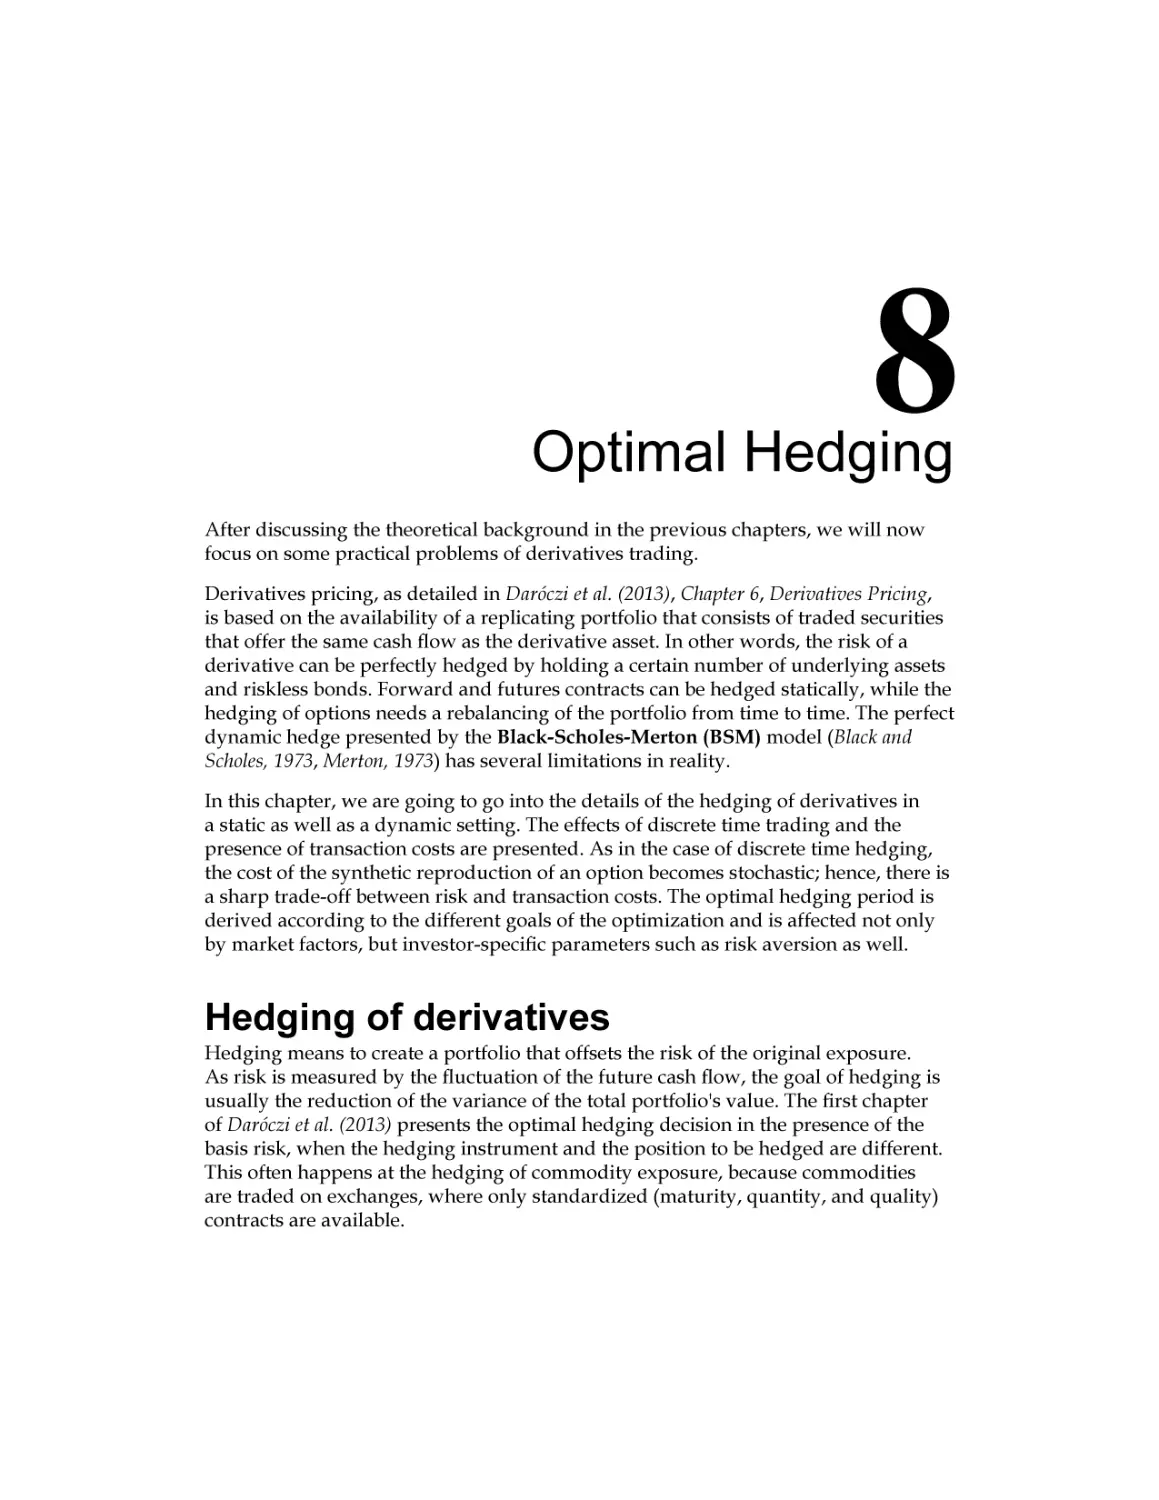 Chapter 8
Hedging of derivatives